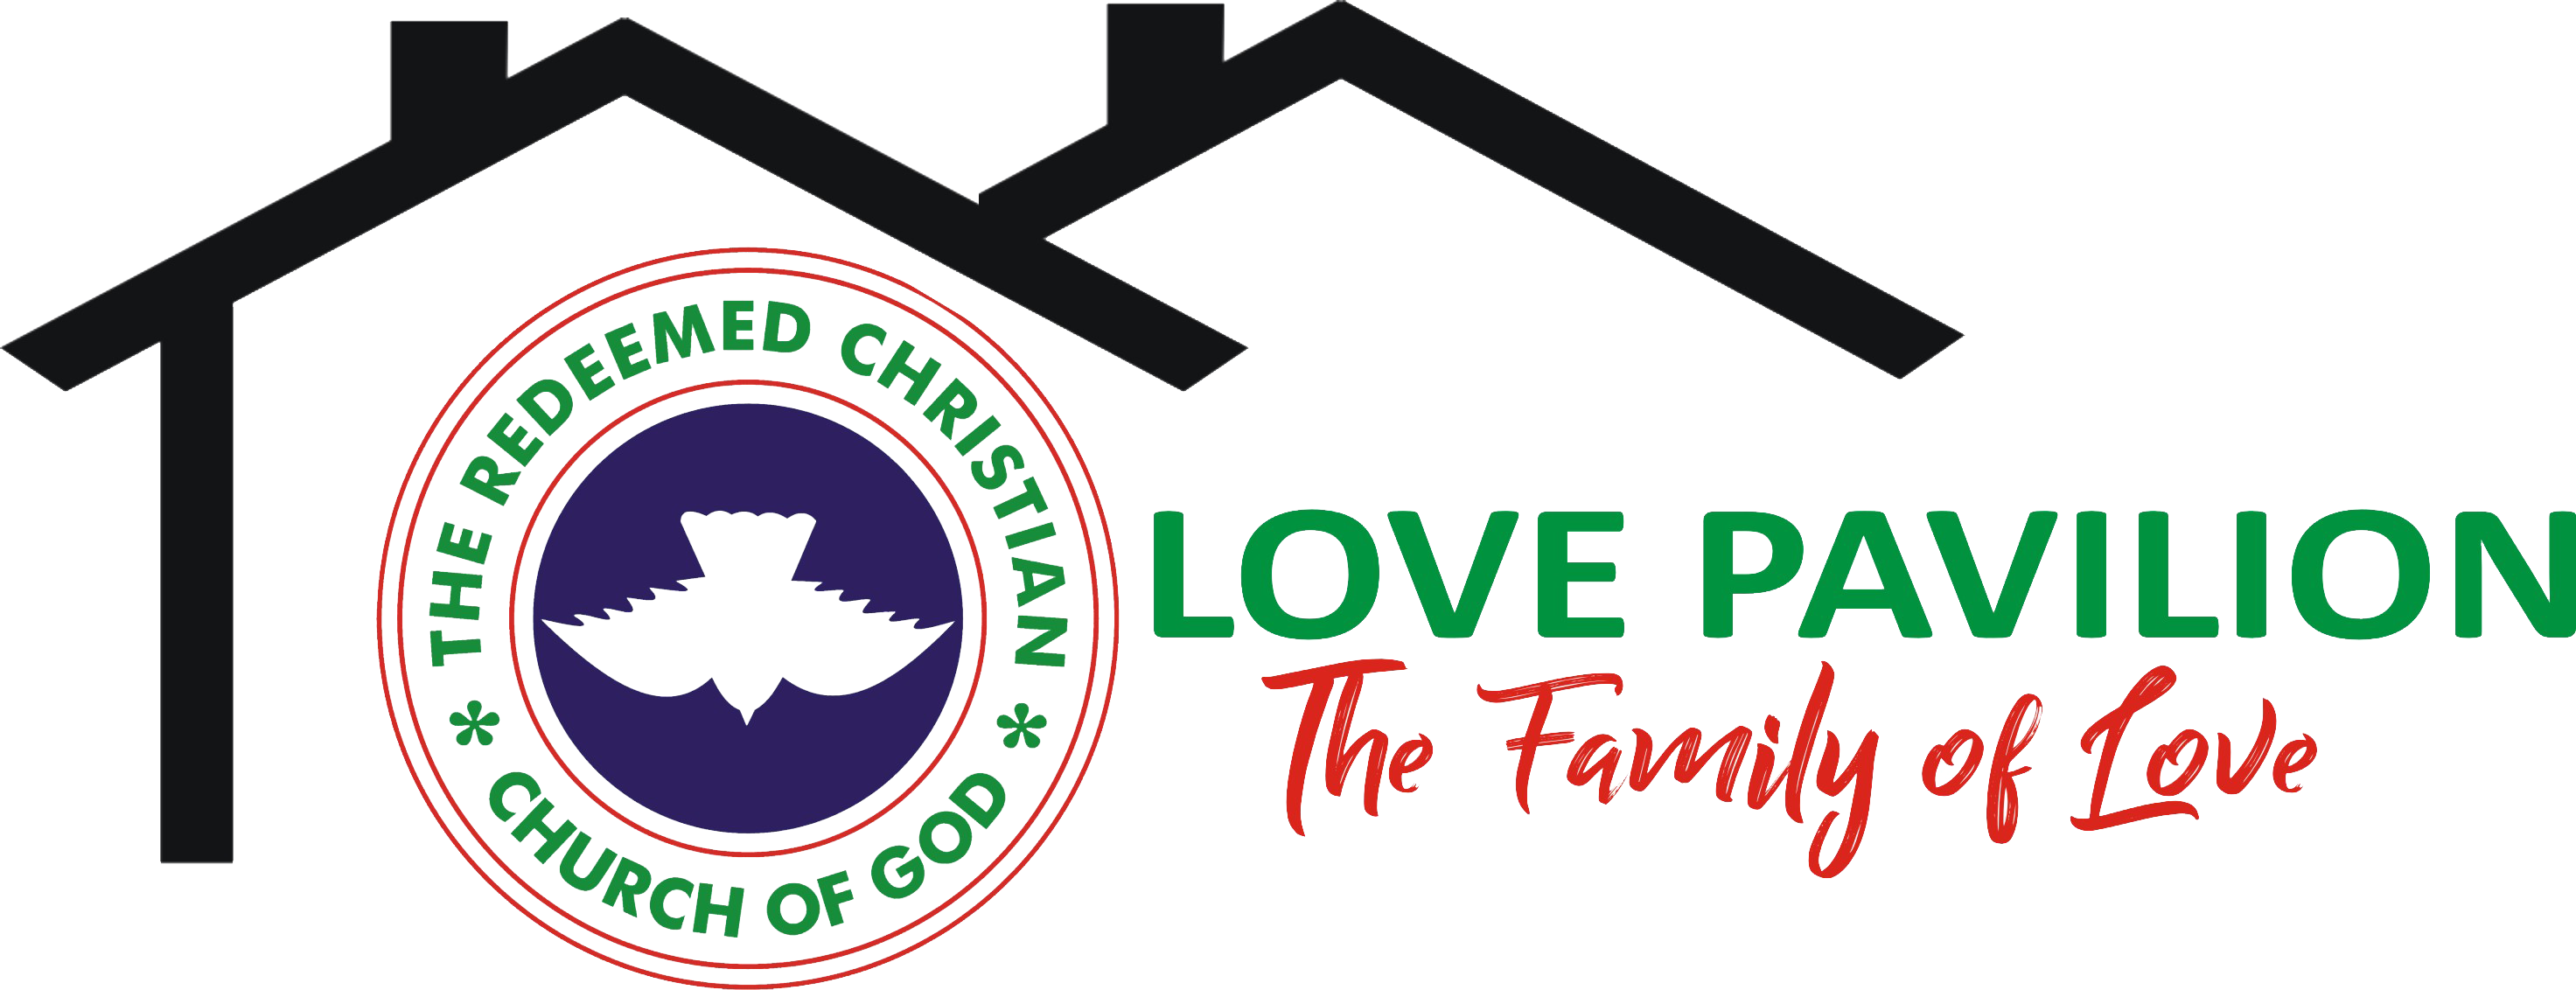 Rccg Love Pavilion - Redeemed Christian Church Of God (2945x1132), Png Download